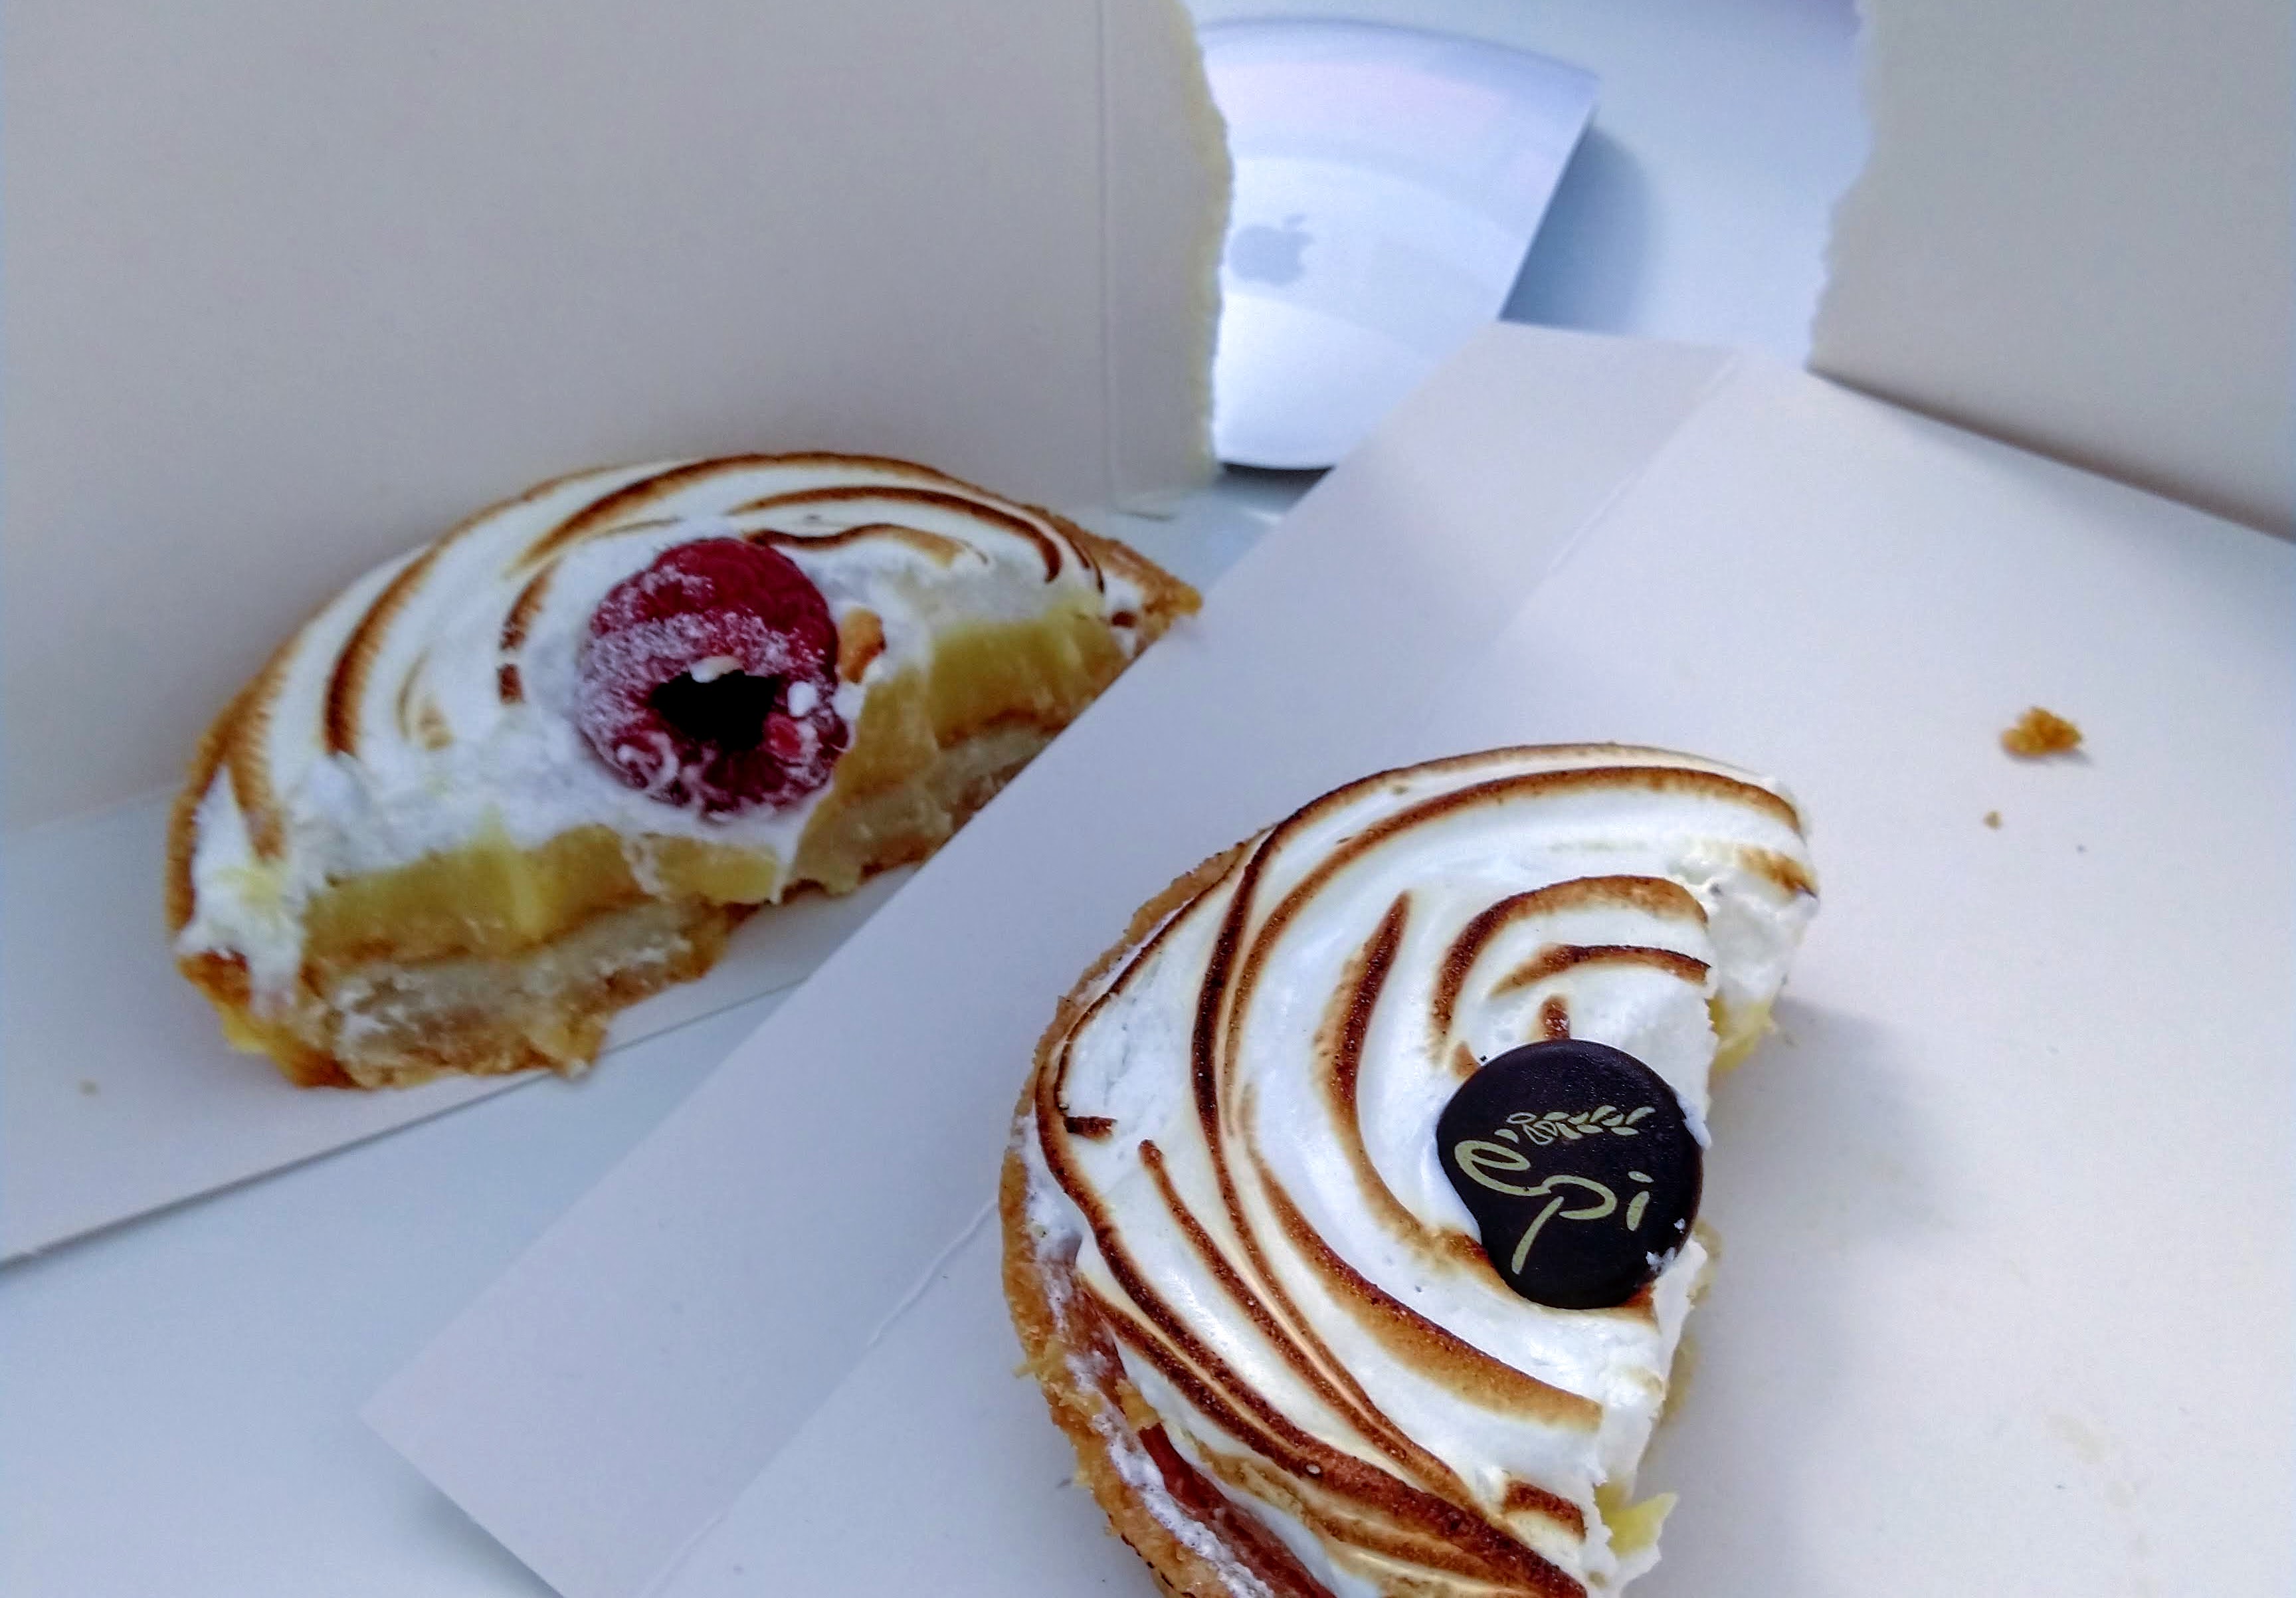 A meringue tartelette divided in two parts at a desk